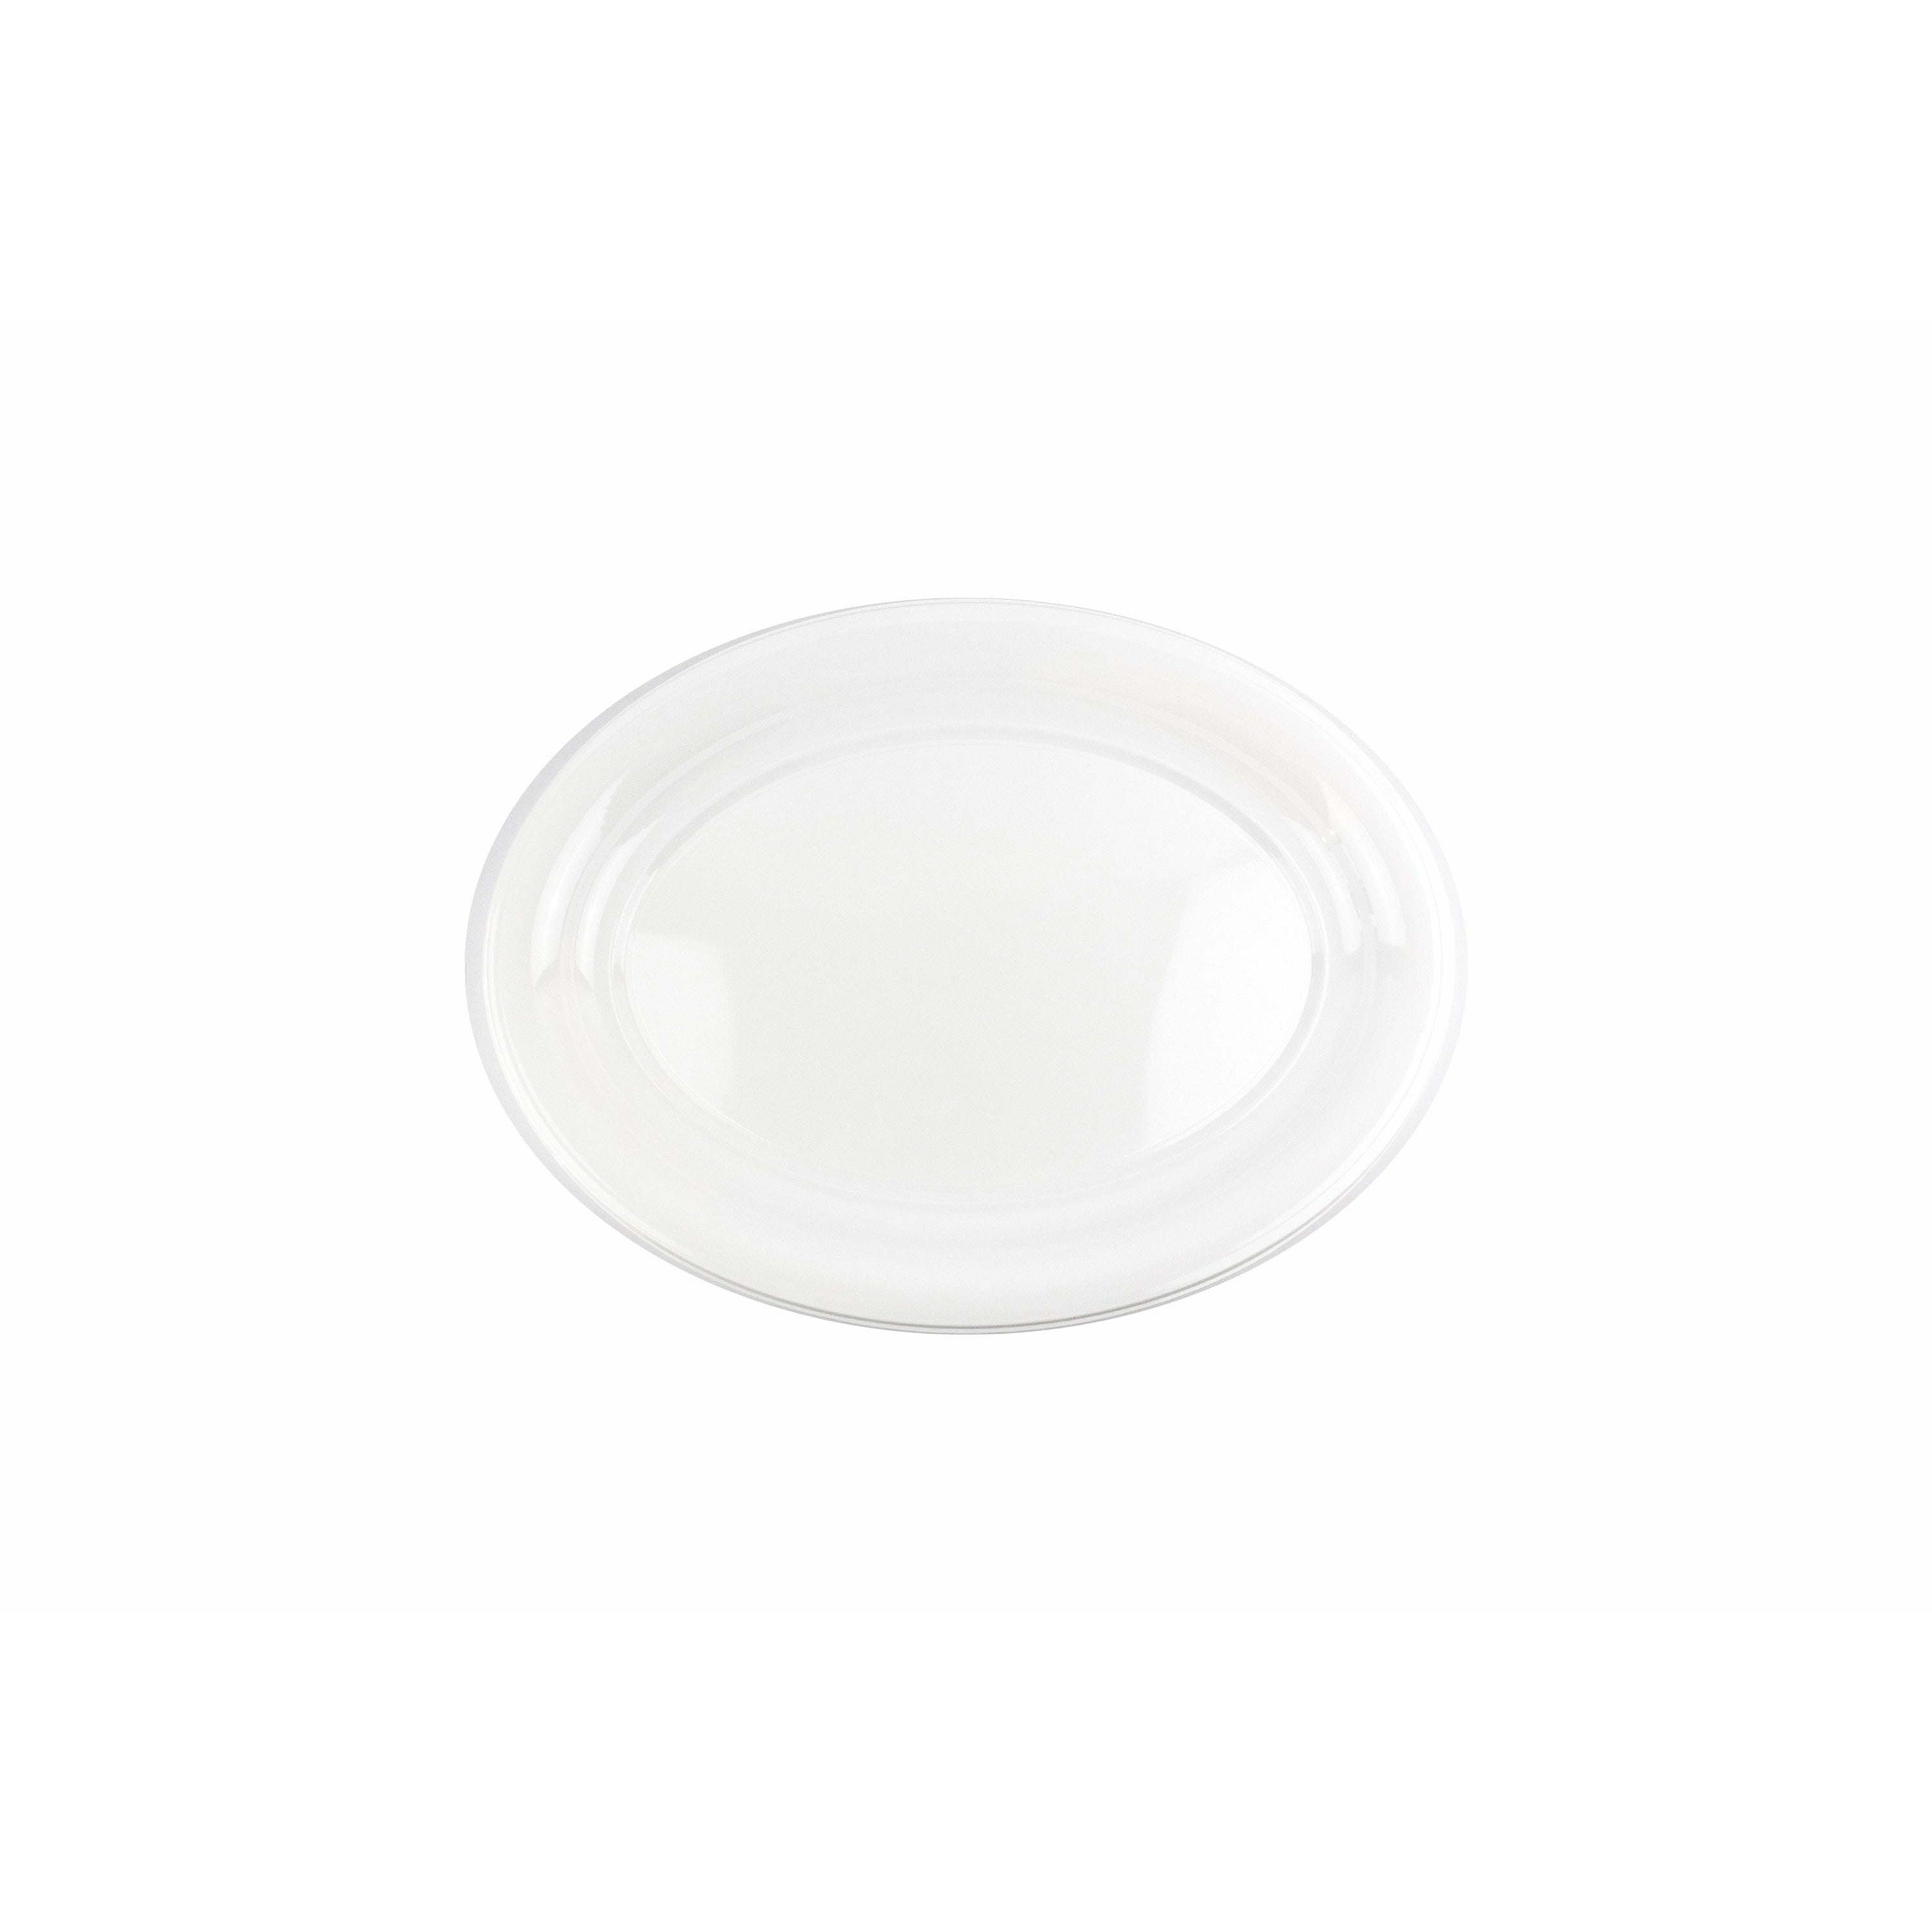 Everyday Partyware White Oval Tray Recyclable - 2 Pack 36x48cm Default Title